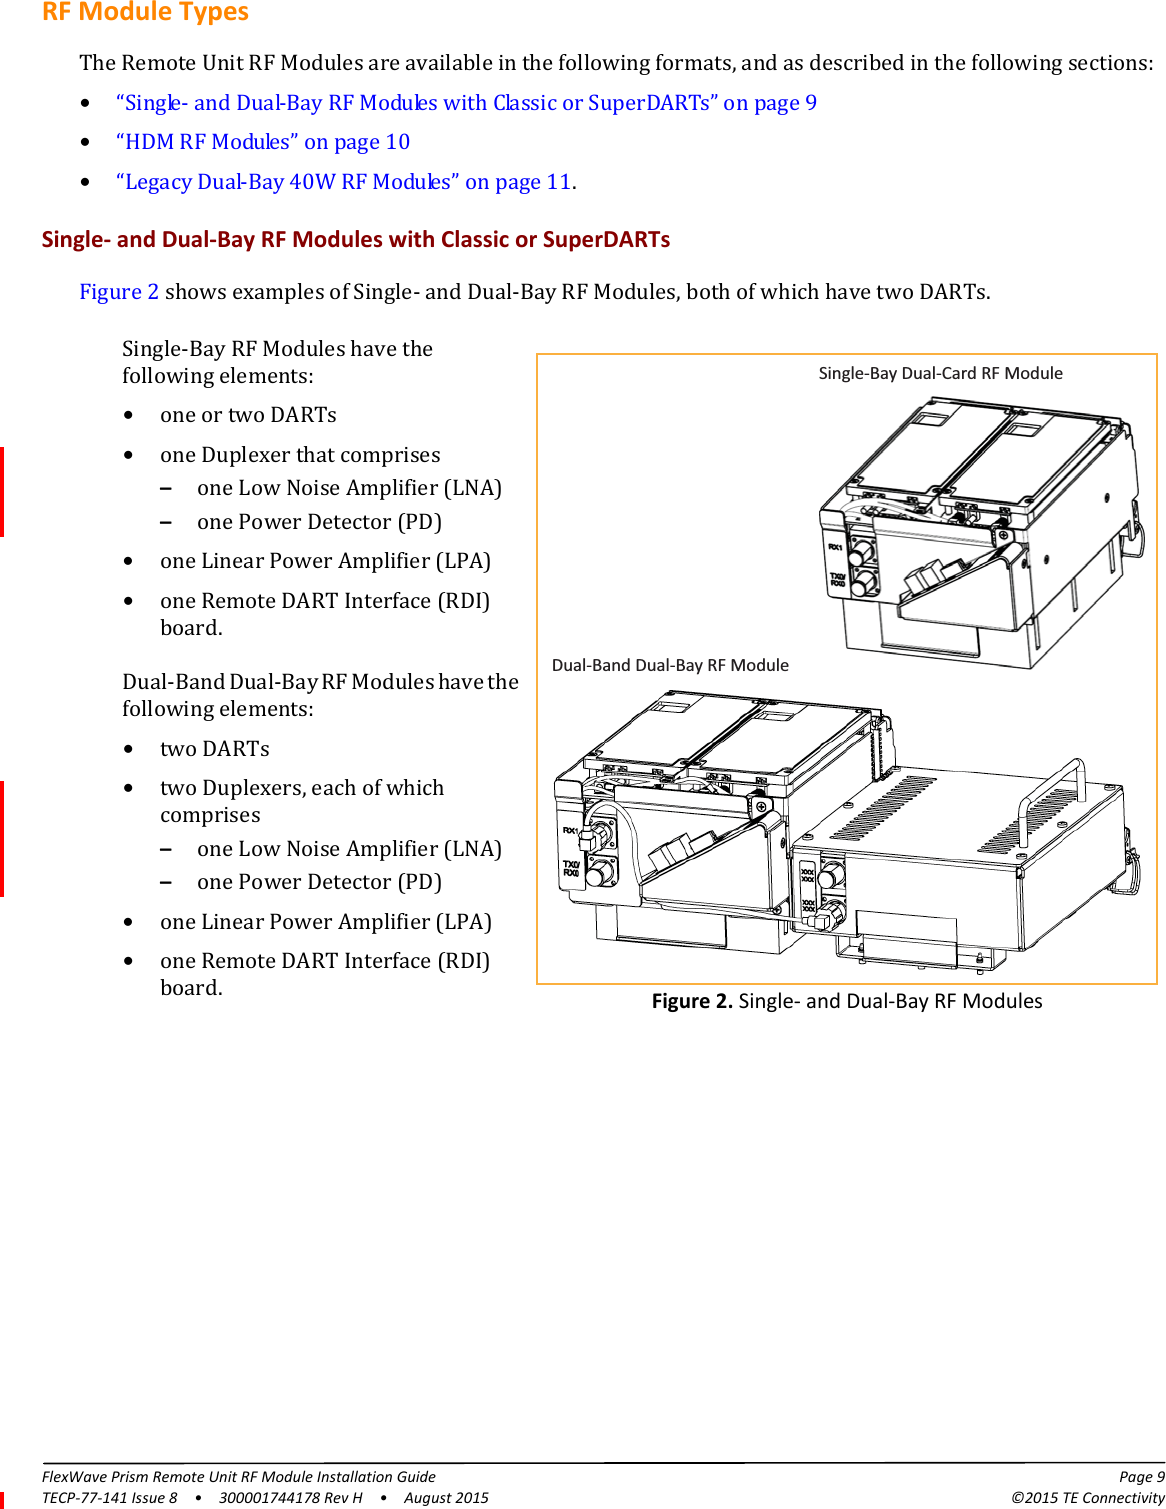 FlexWave Prism Remote Unit RF Module Installation Guide Page 9TECP-77-141 Issue 8  •  300001744178 Rev H  •  August 2015 ©2015 TE ConnectivityRF Module TypesThe Remote Unit RF Modules are available in the following formats, and as described in the following sections:•“Single- and Dual-Bay RF Modules with Classic or SuperDARTs” on page 9•“HDM RF Modules” on page 10•“Legacy Dual-Bay 40W RF Modules” on page 11.Single- and Dual-Bay RF Modules with Classic or SuperDARTsFigure 2 shows examples of Single- and Dual-Bay RF Modules, both of which have two DARTs. Single-Bay RF Modules have the following elements:•one or two DARTs•one Duplexer that comprises–one Low Noise Amplifier (LNA)–one Power Detector (PD)•one Linear Power Amplifier (LPA)Dual-Band Dual-Bay RF Modules have the following elements:•two DARTs•two Duplexers, each of which comprises–one Low Noise Amplifier (LNA)–one Power Detector (PD)•one Linear Power Amplifier (LPA)•one Remote DART Interface (RDI) board.Dual-Band Dual-Bay RF ModuleSingle-Bay Dual-Card RF ModuleFigure 2. Single- and Dual-Bay RF Modules•one Remote DART Interface (RDI) board.